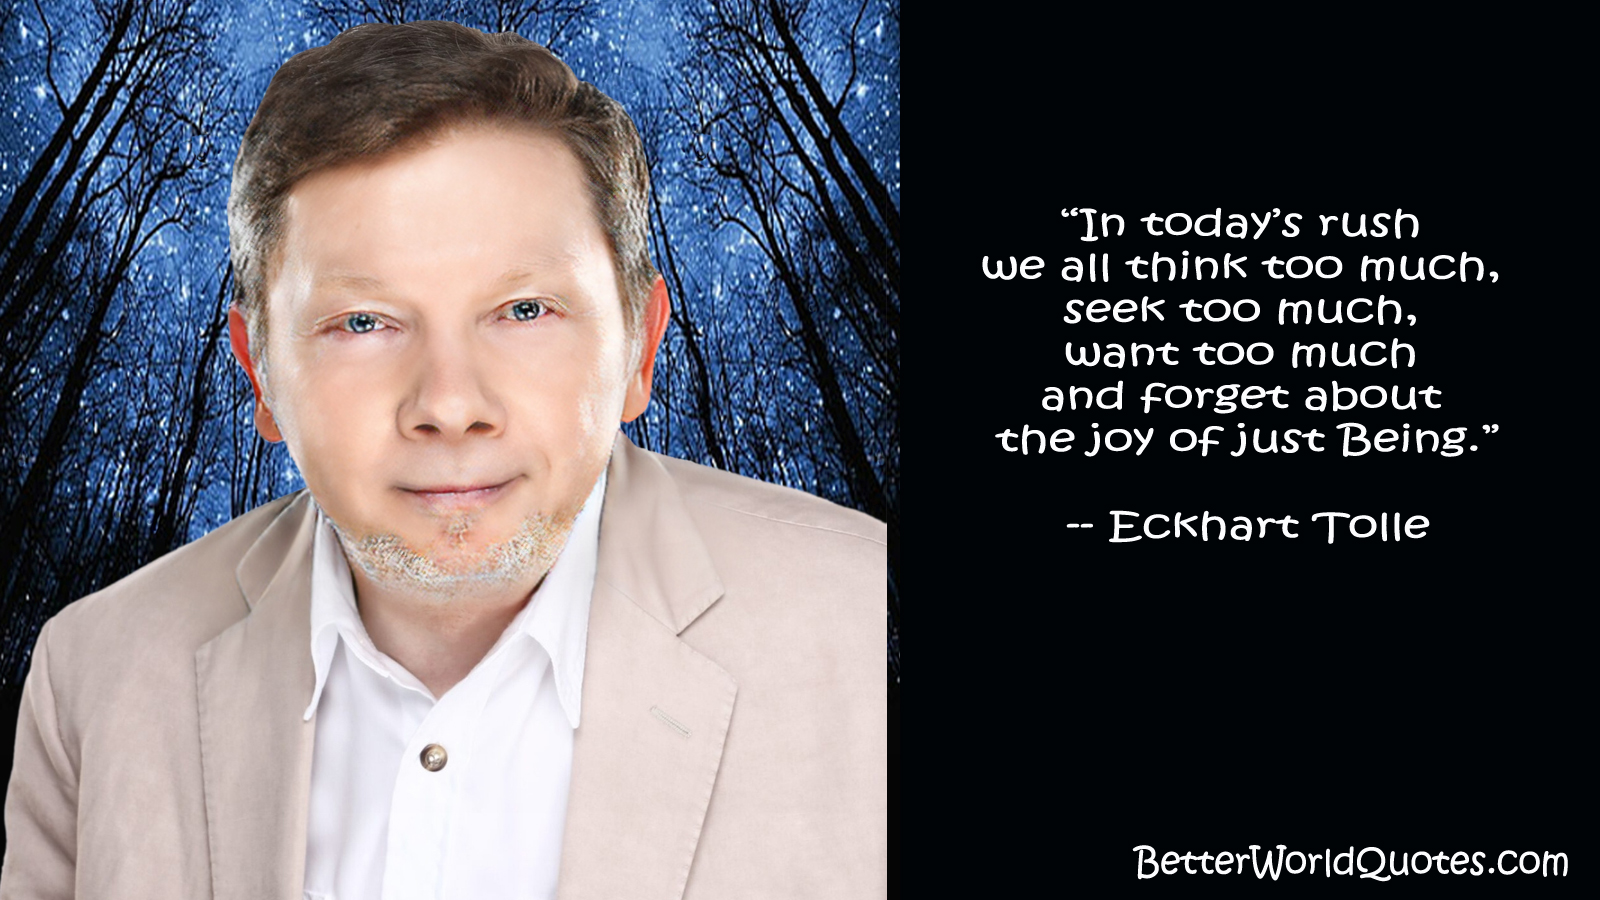 Eckhart Tolle: In todays rush we all think too much, seek too much, want too much and forget about the joy of just Being.
 Eckhart Tolle
